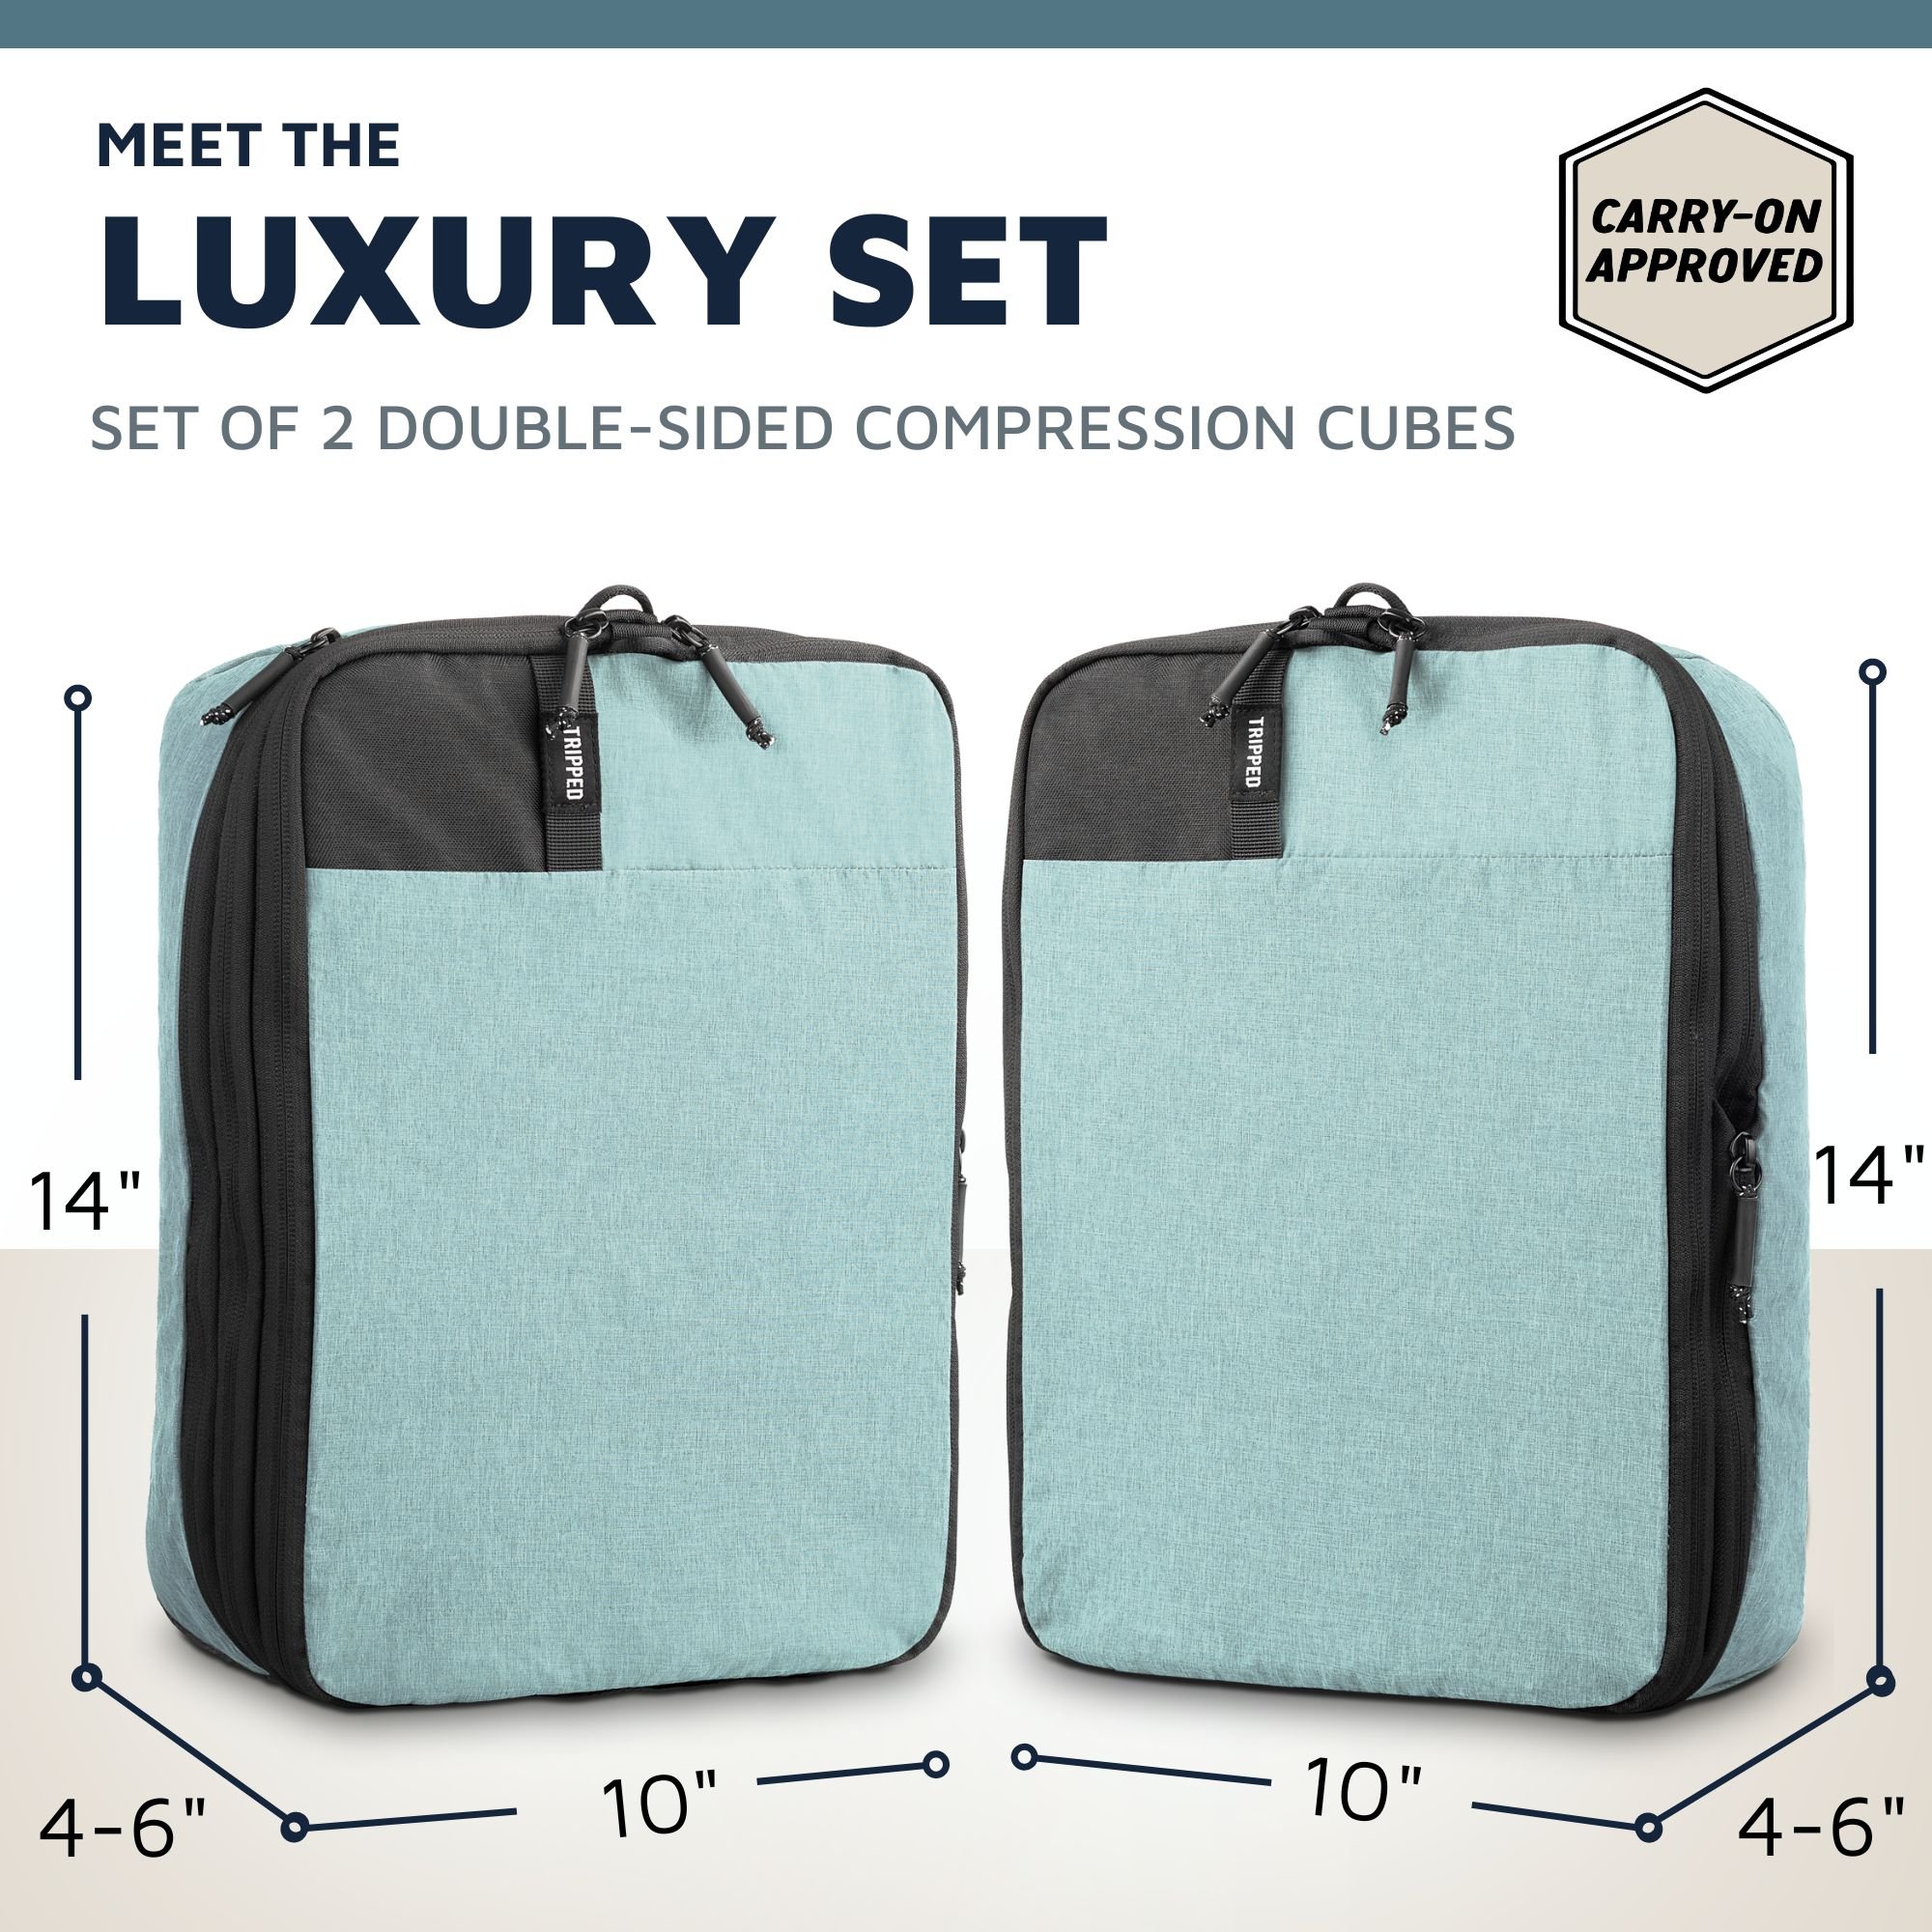 business class packing cubes luxury compression cube teal.jpg